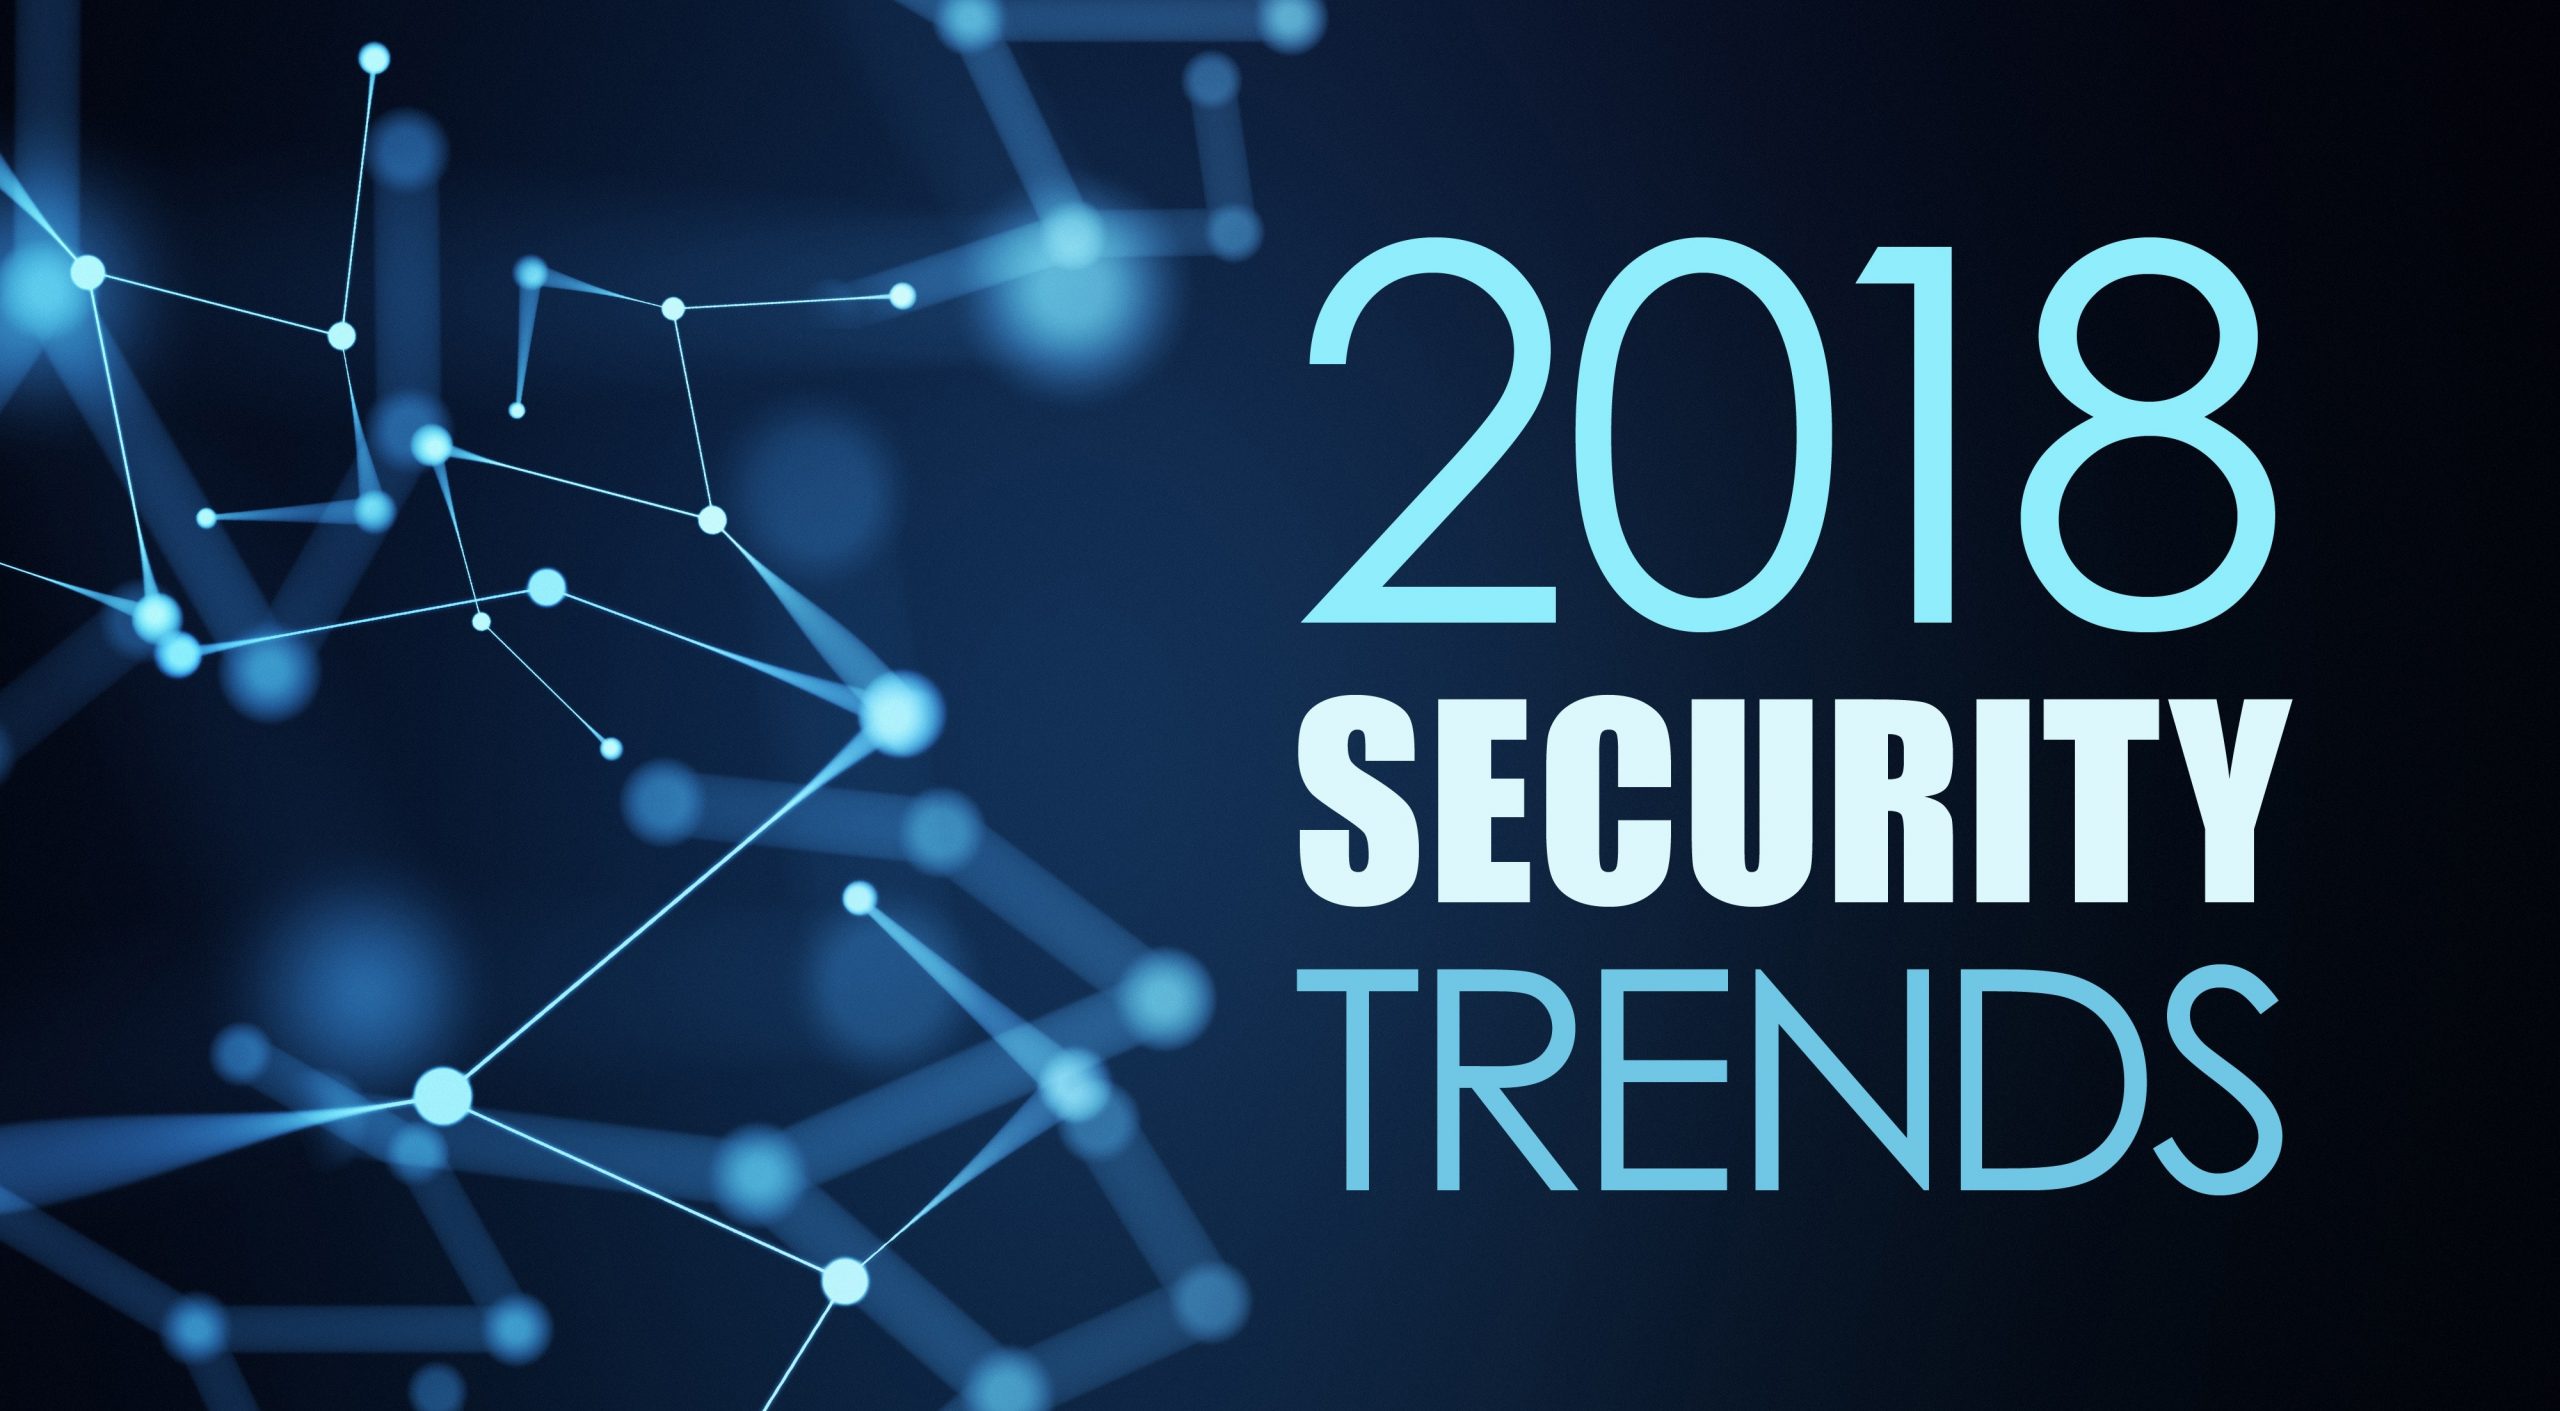 Security Trends scaled